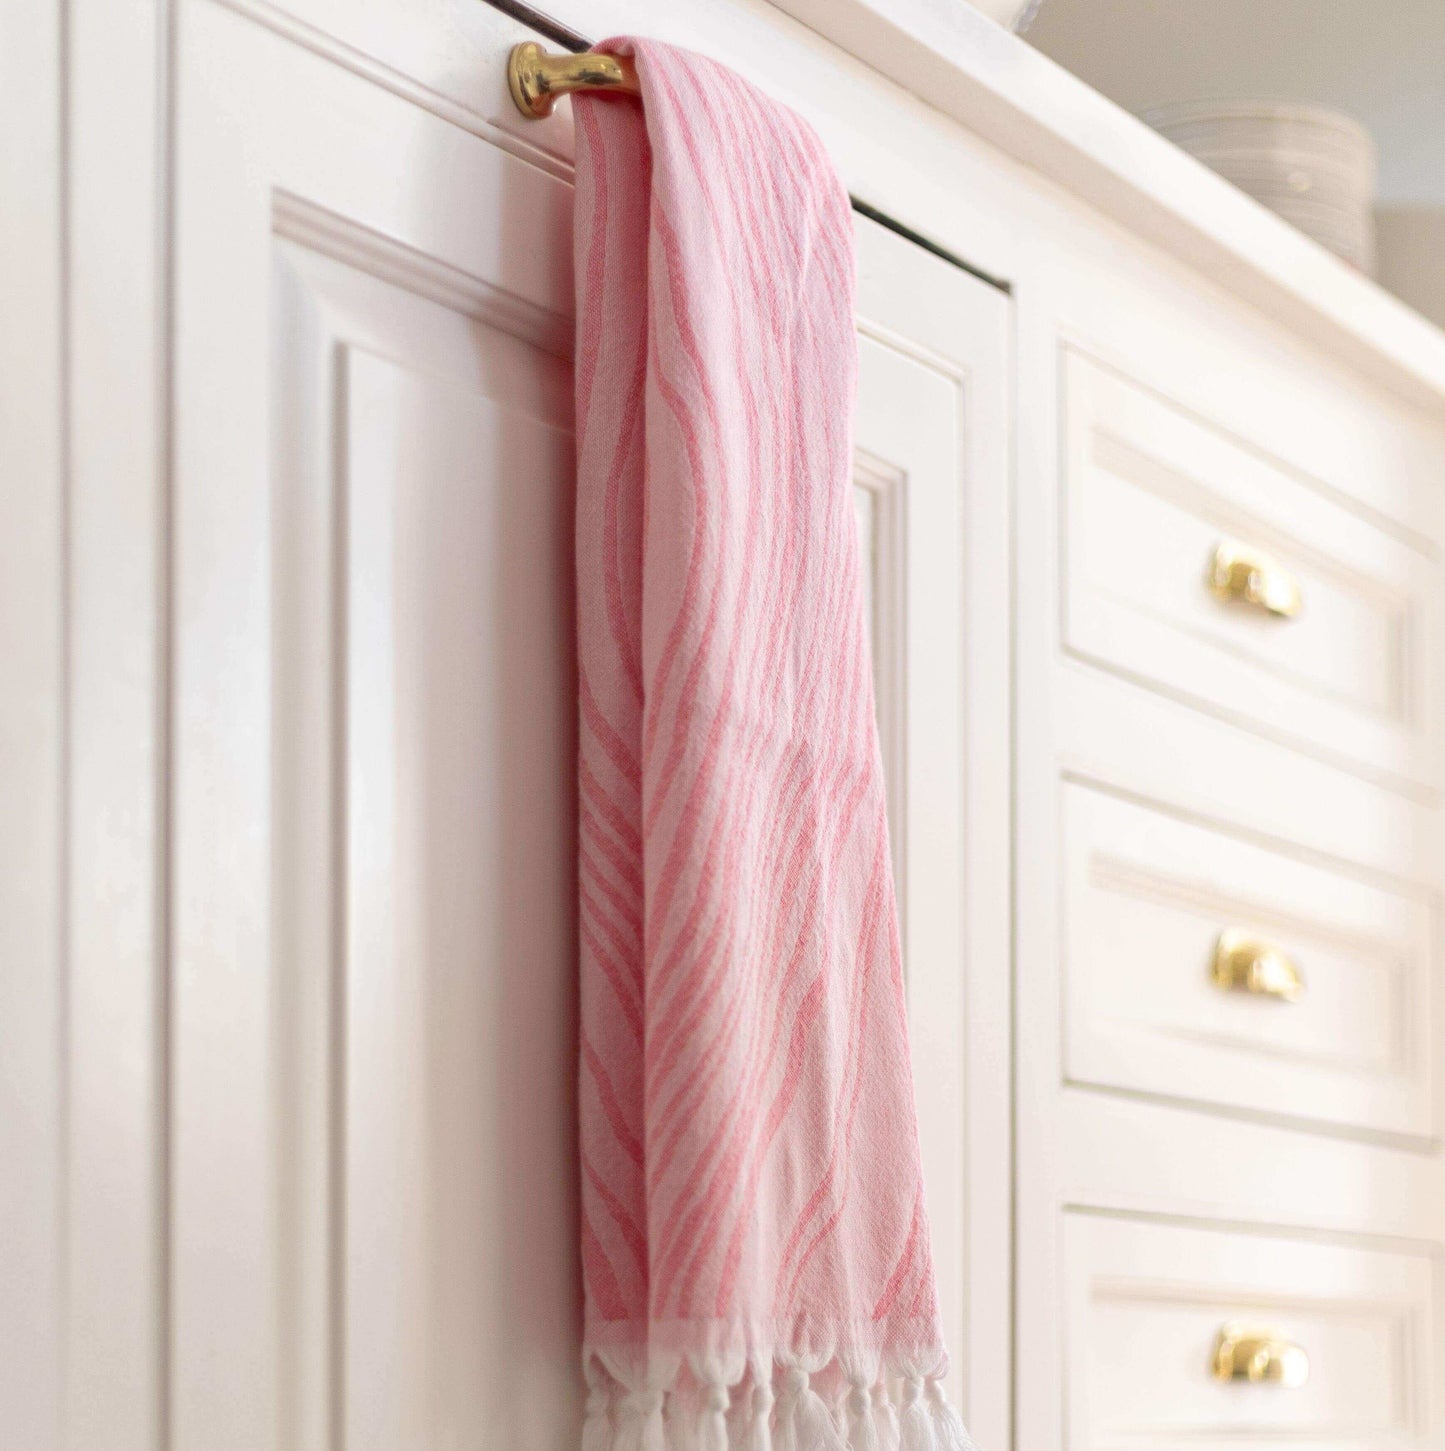 Pink Turkish hand towel hanging in the kitchen as a tea towel